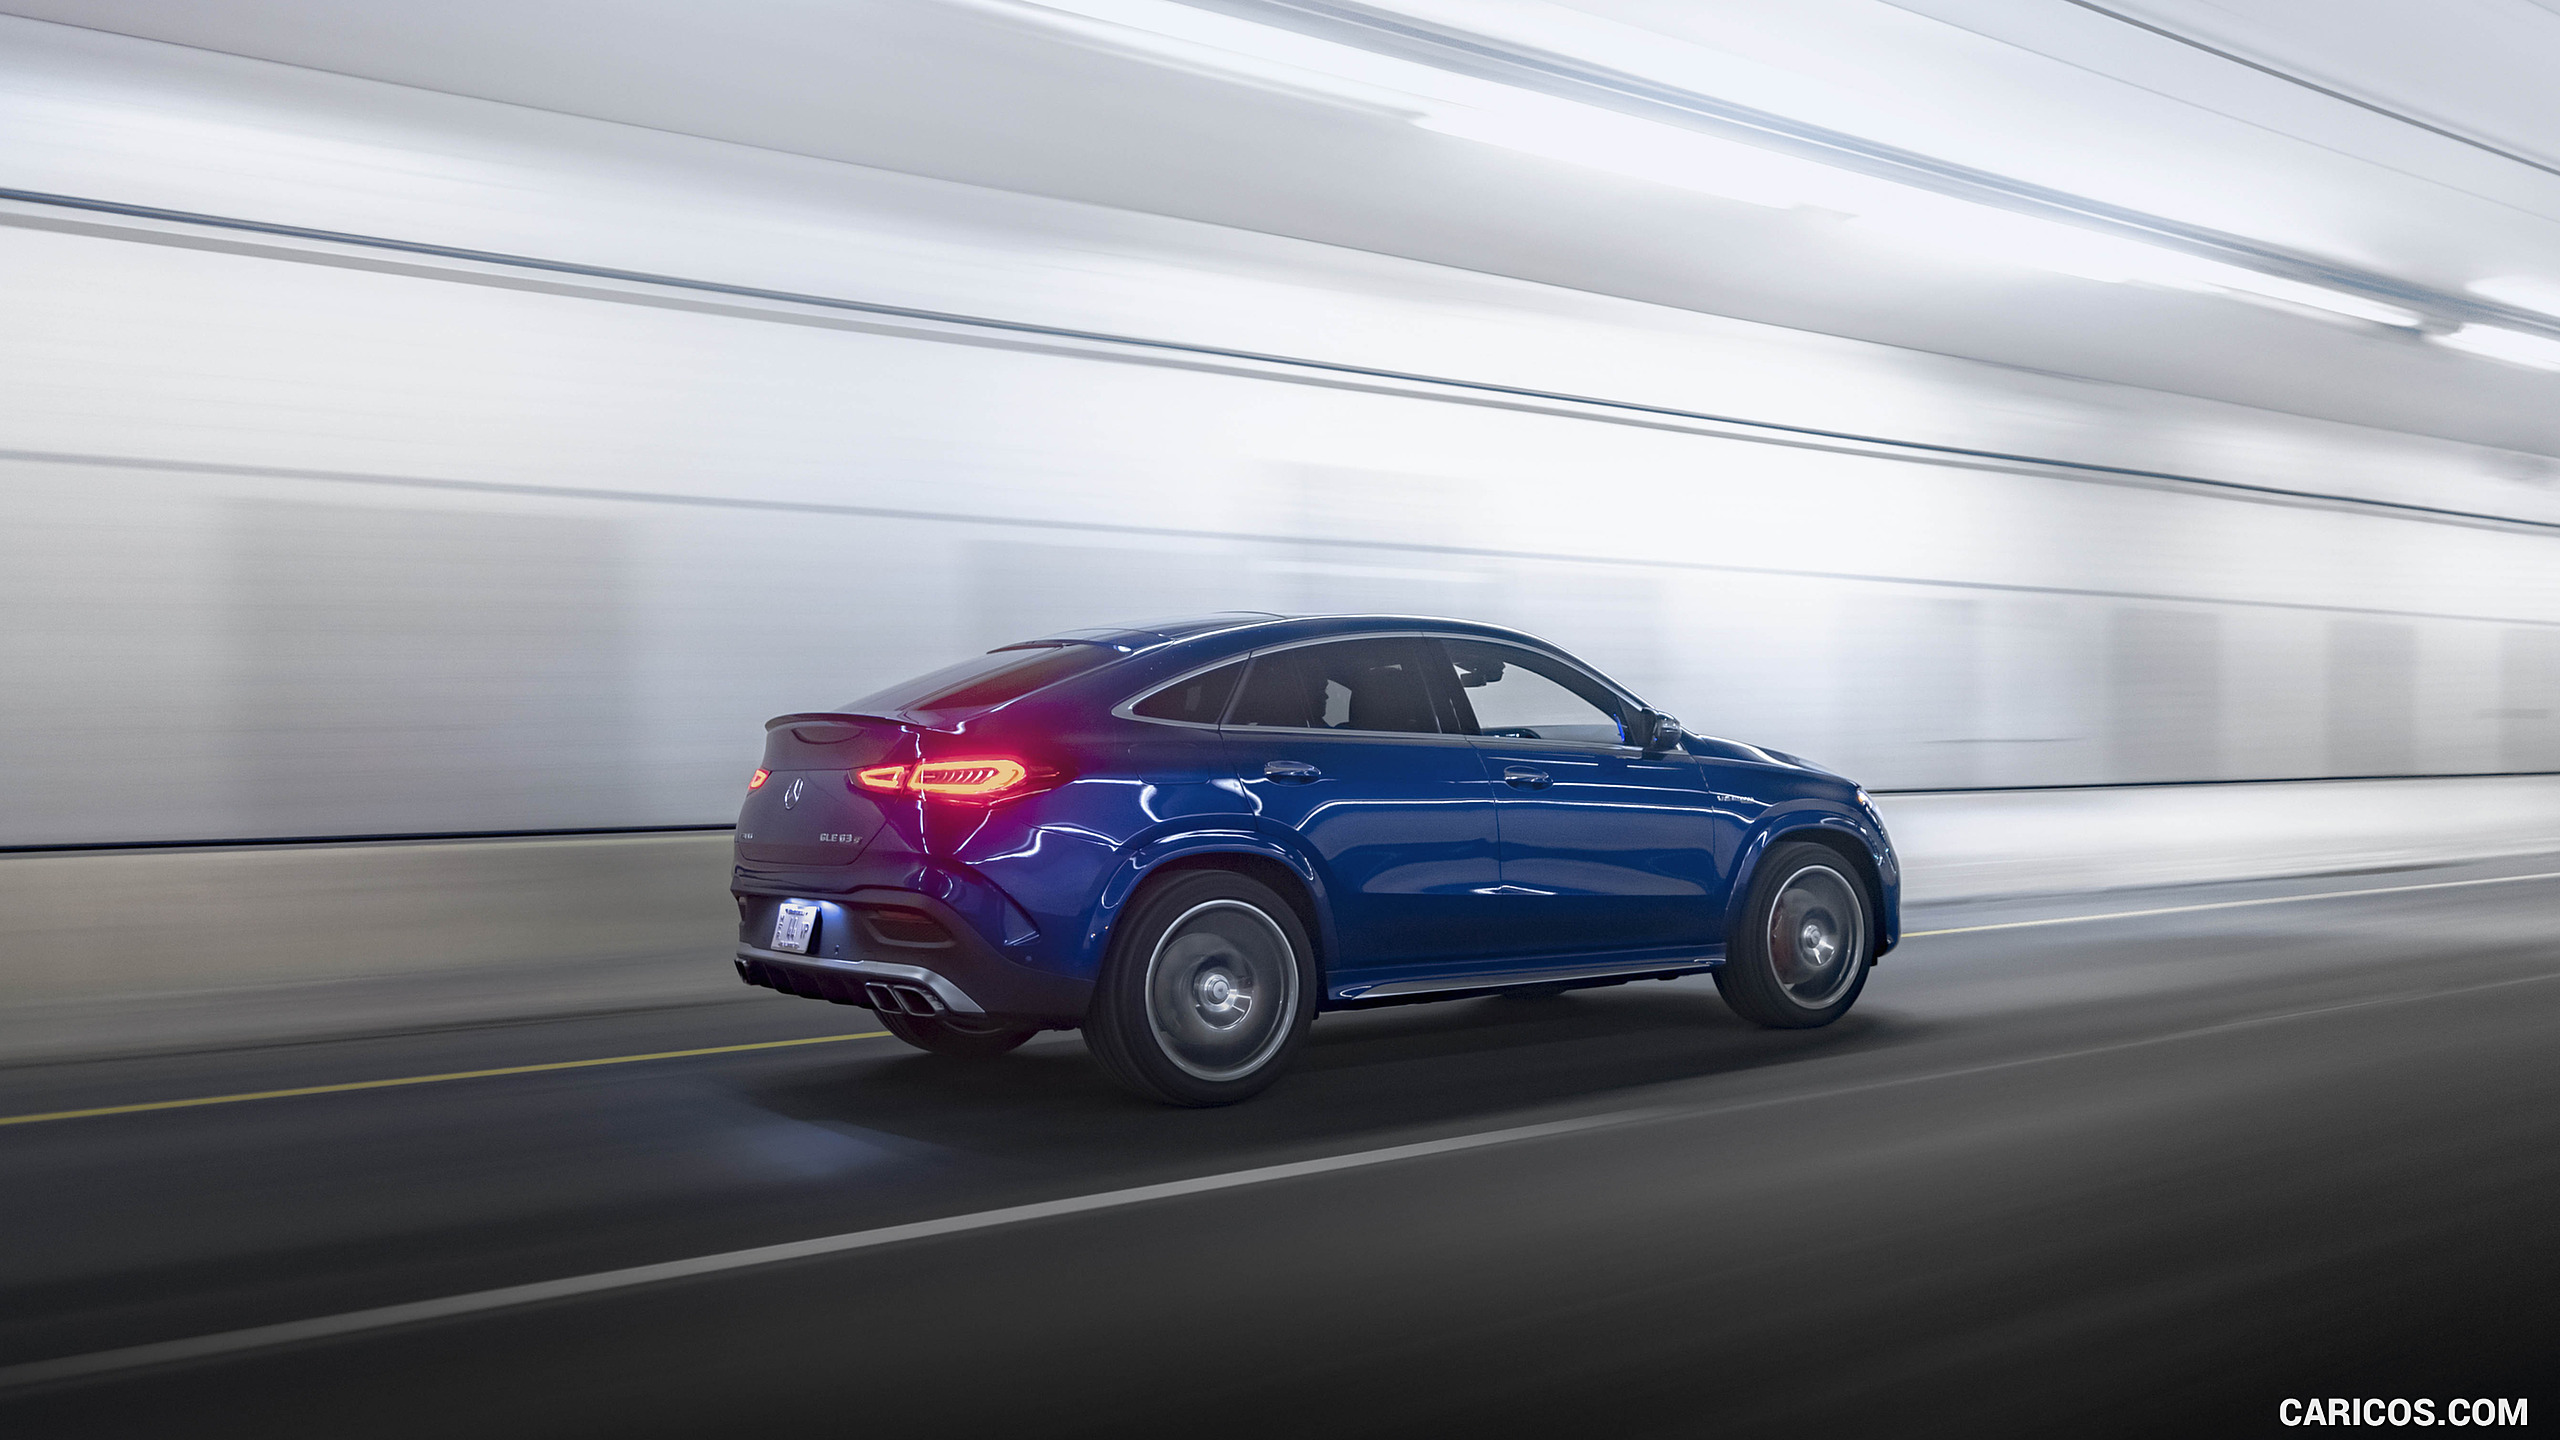 2021 Mercedes-AMG GLE 63 S Coupe (US-Spec) - Rear Three-Quarter, #35 of 66